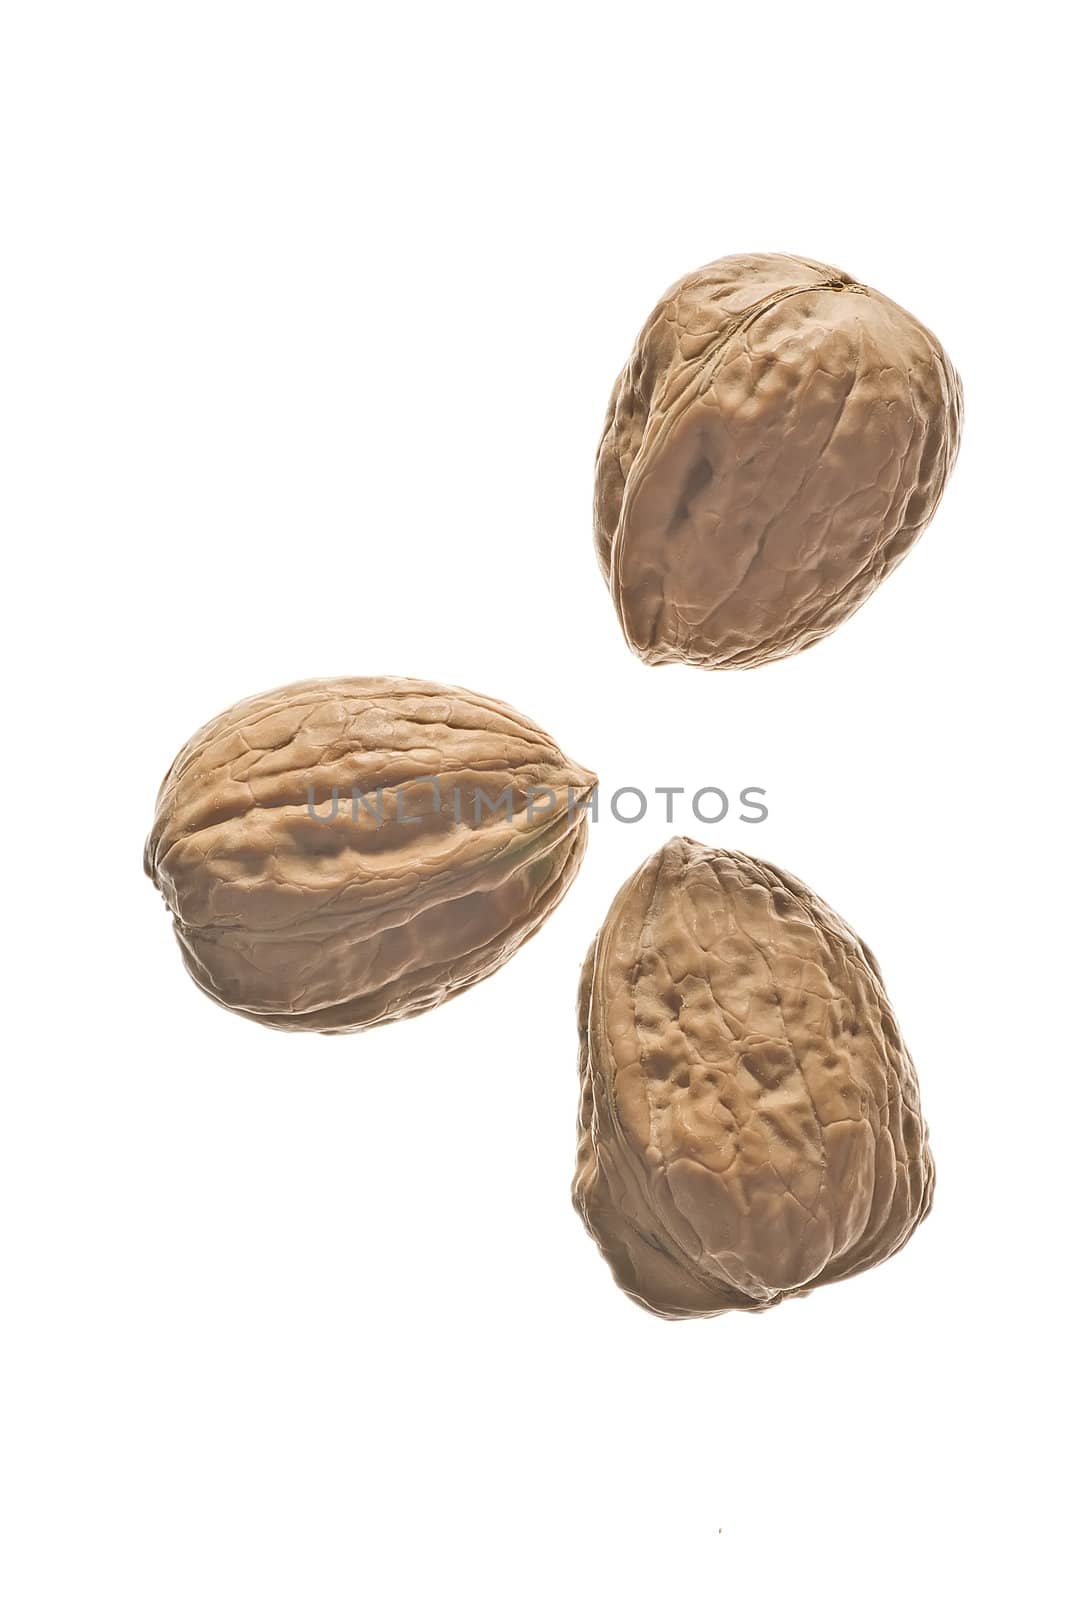 Isolated nuts studio composition on white background